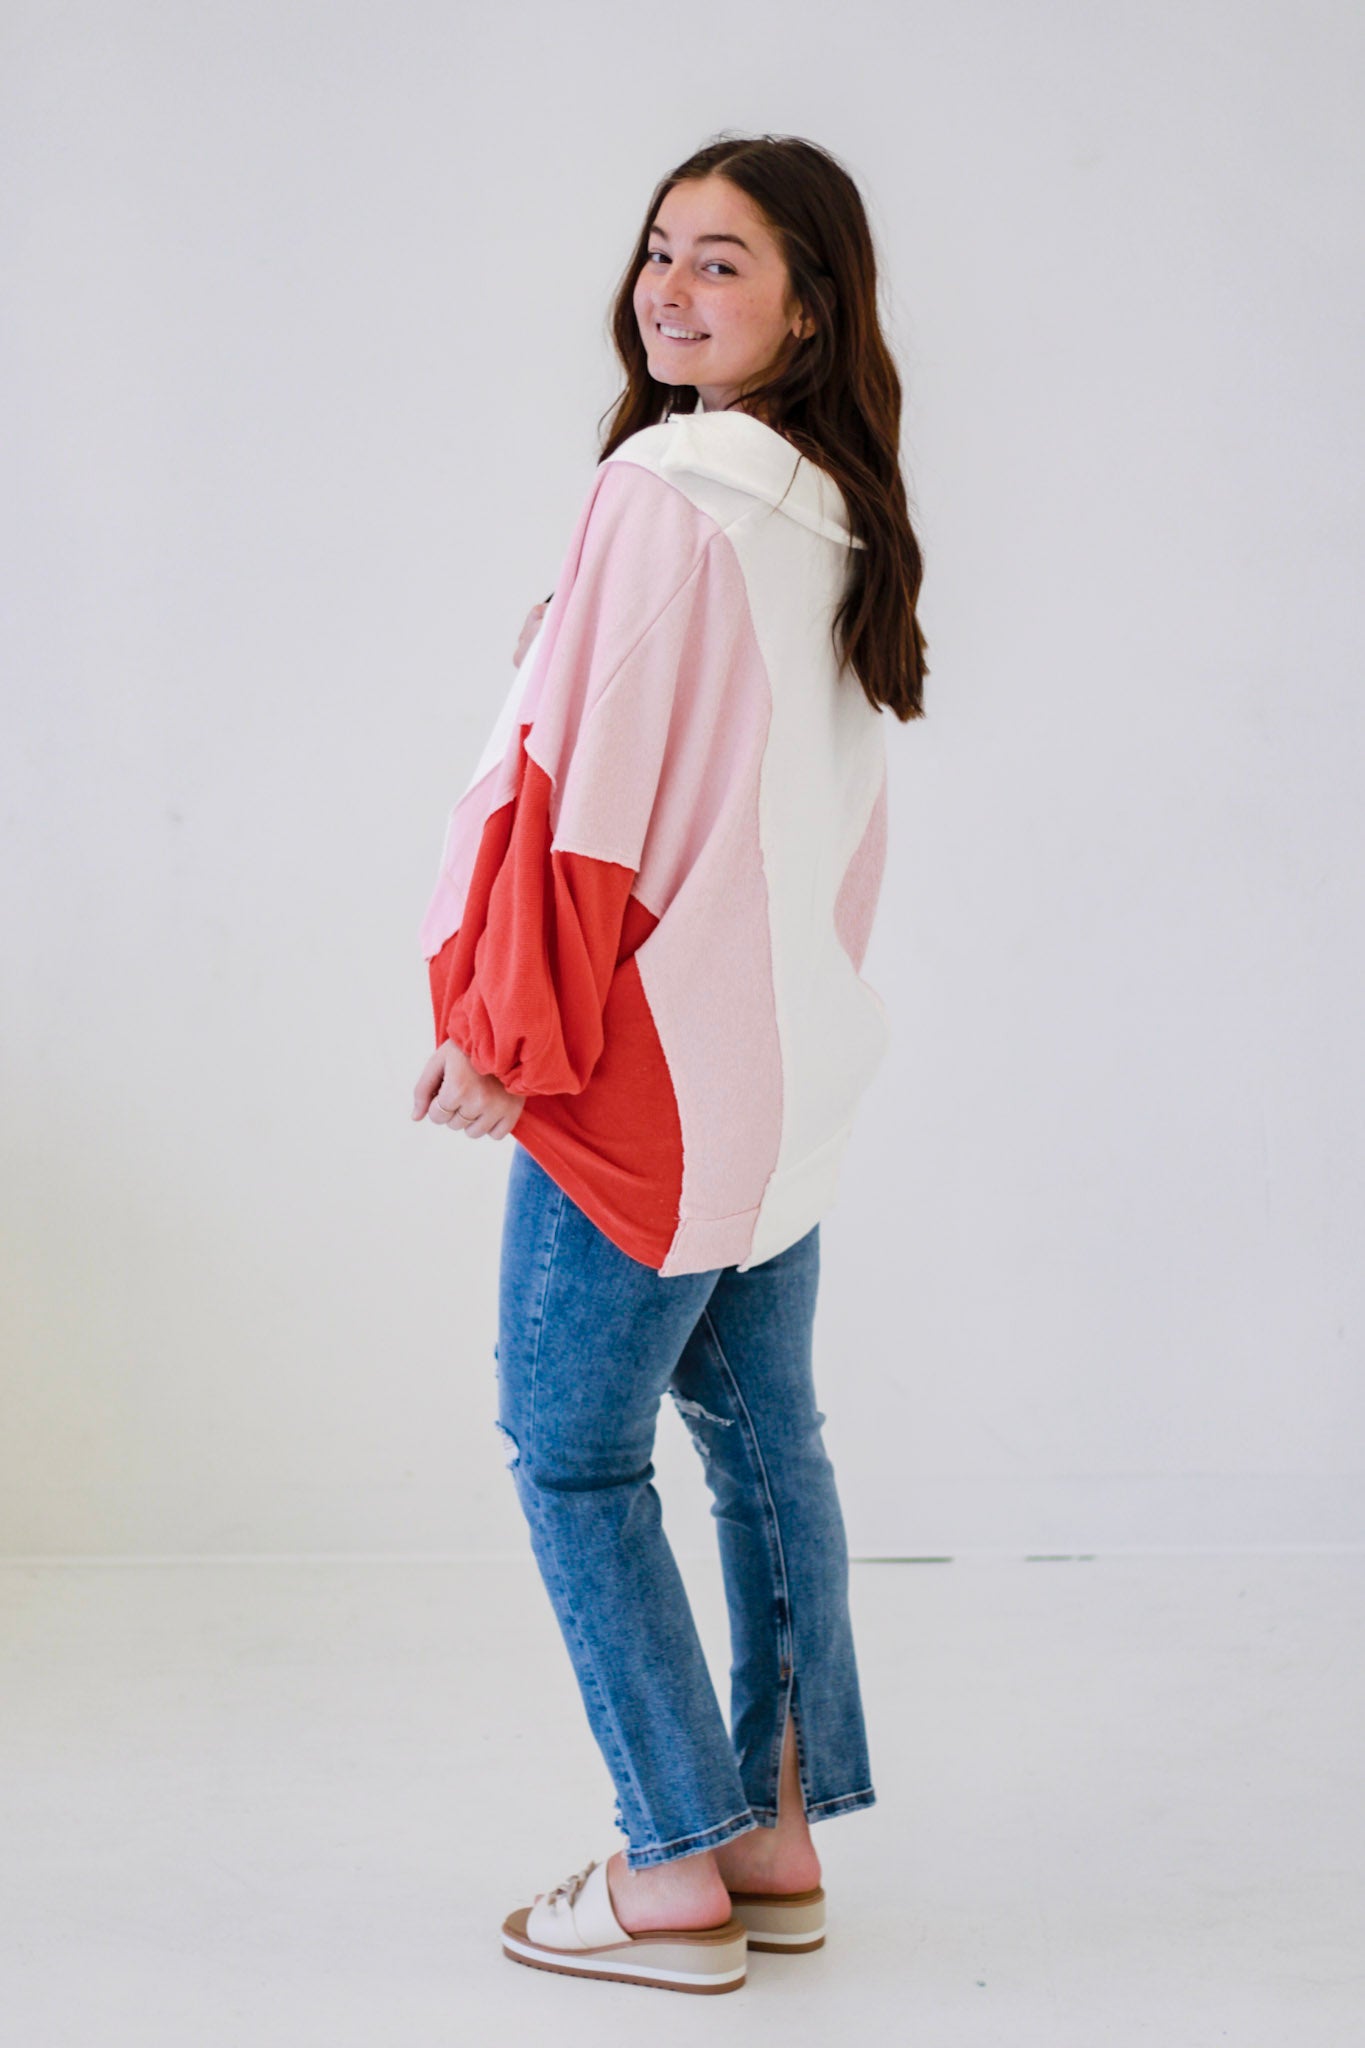 Bring Out the Best Buckletlist Pullover in White, Pink & Red